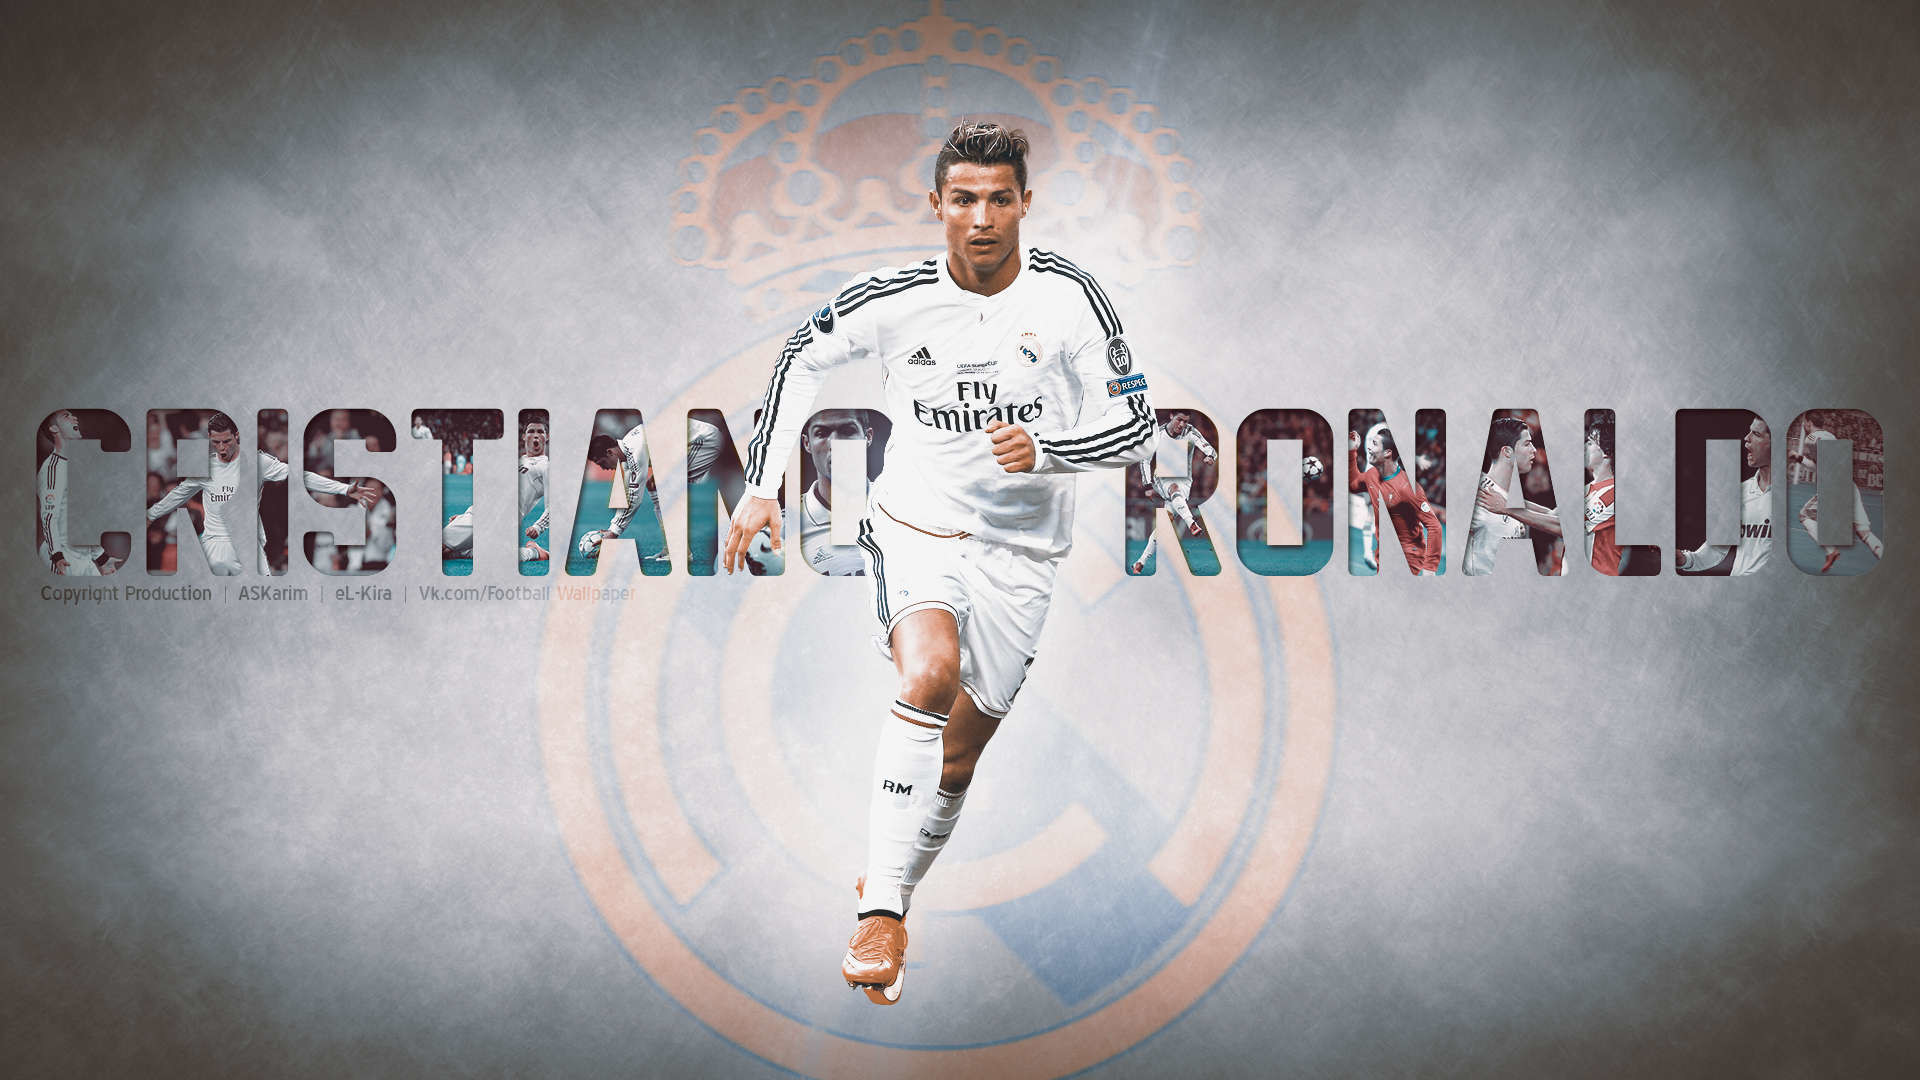 1920x1080 Cristiano Ronaldo 2016 Wallpaper - HD Wallpapers Backgrounds of Your .